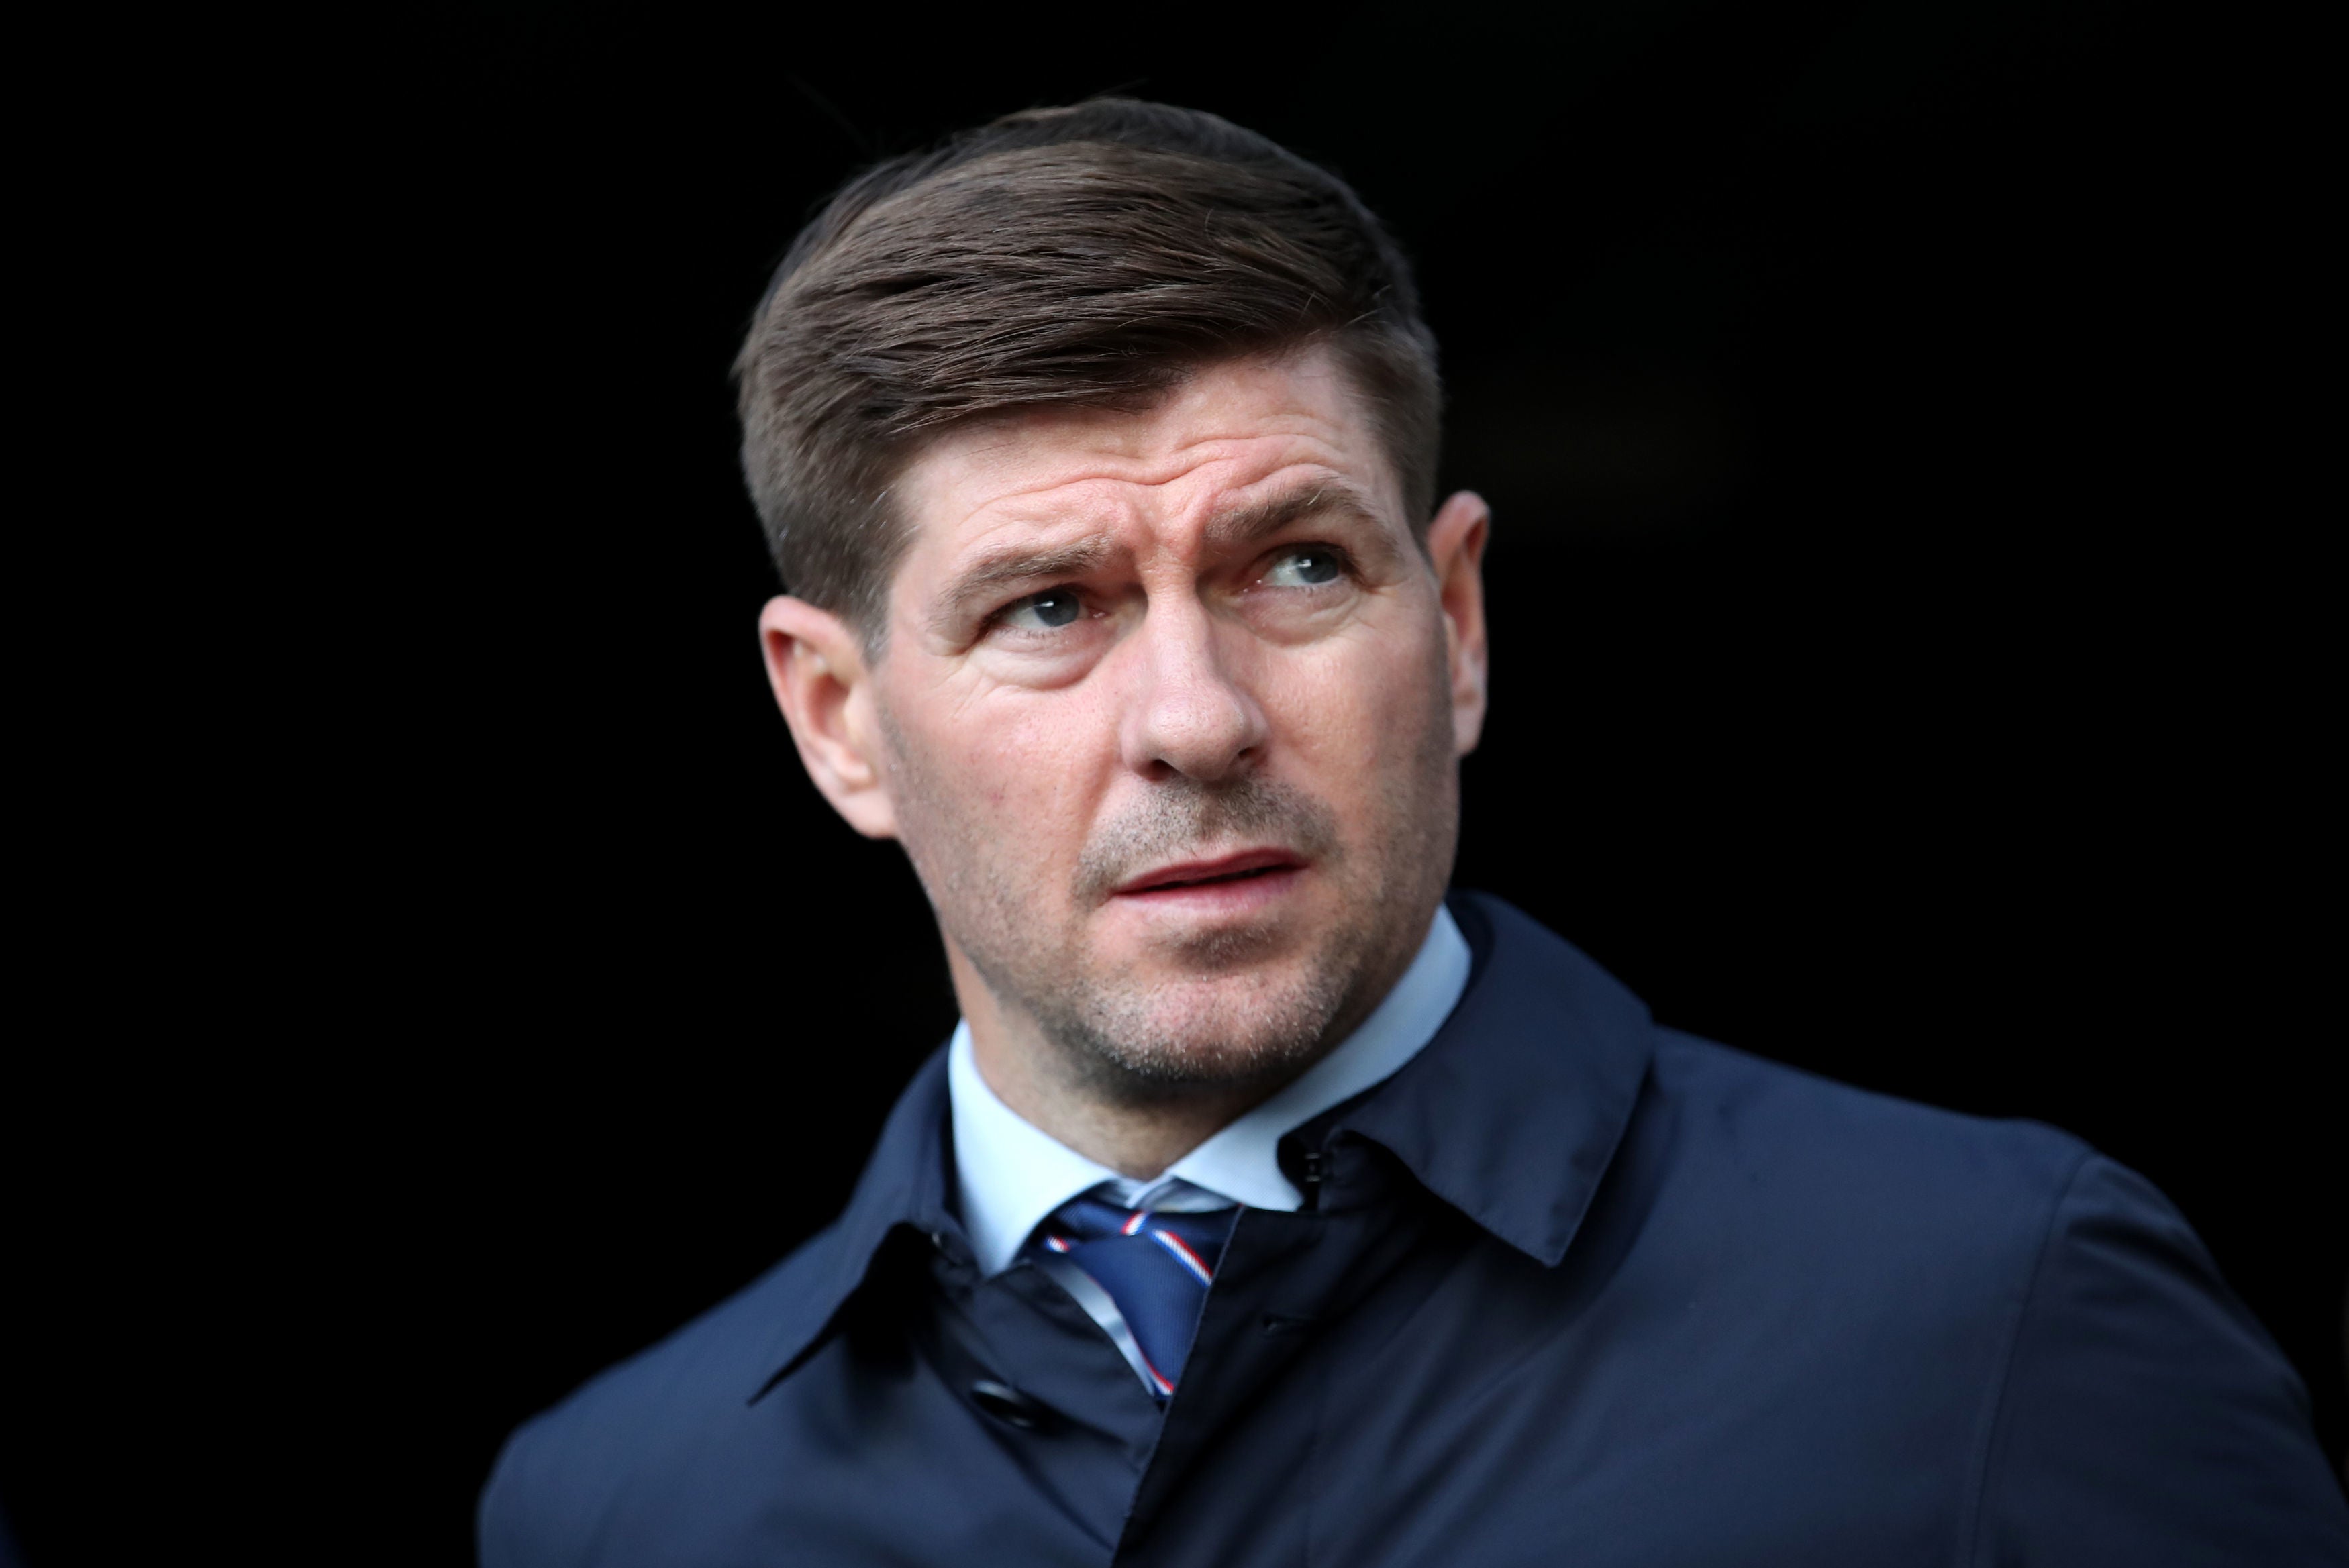 Gerrard has plotted out his path to the Aston Villa job